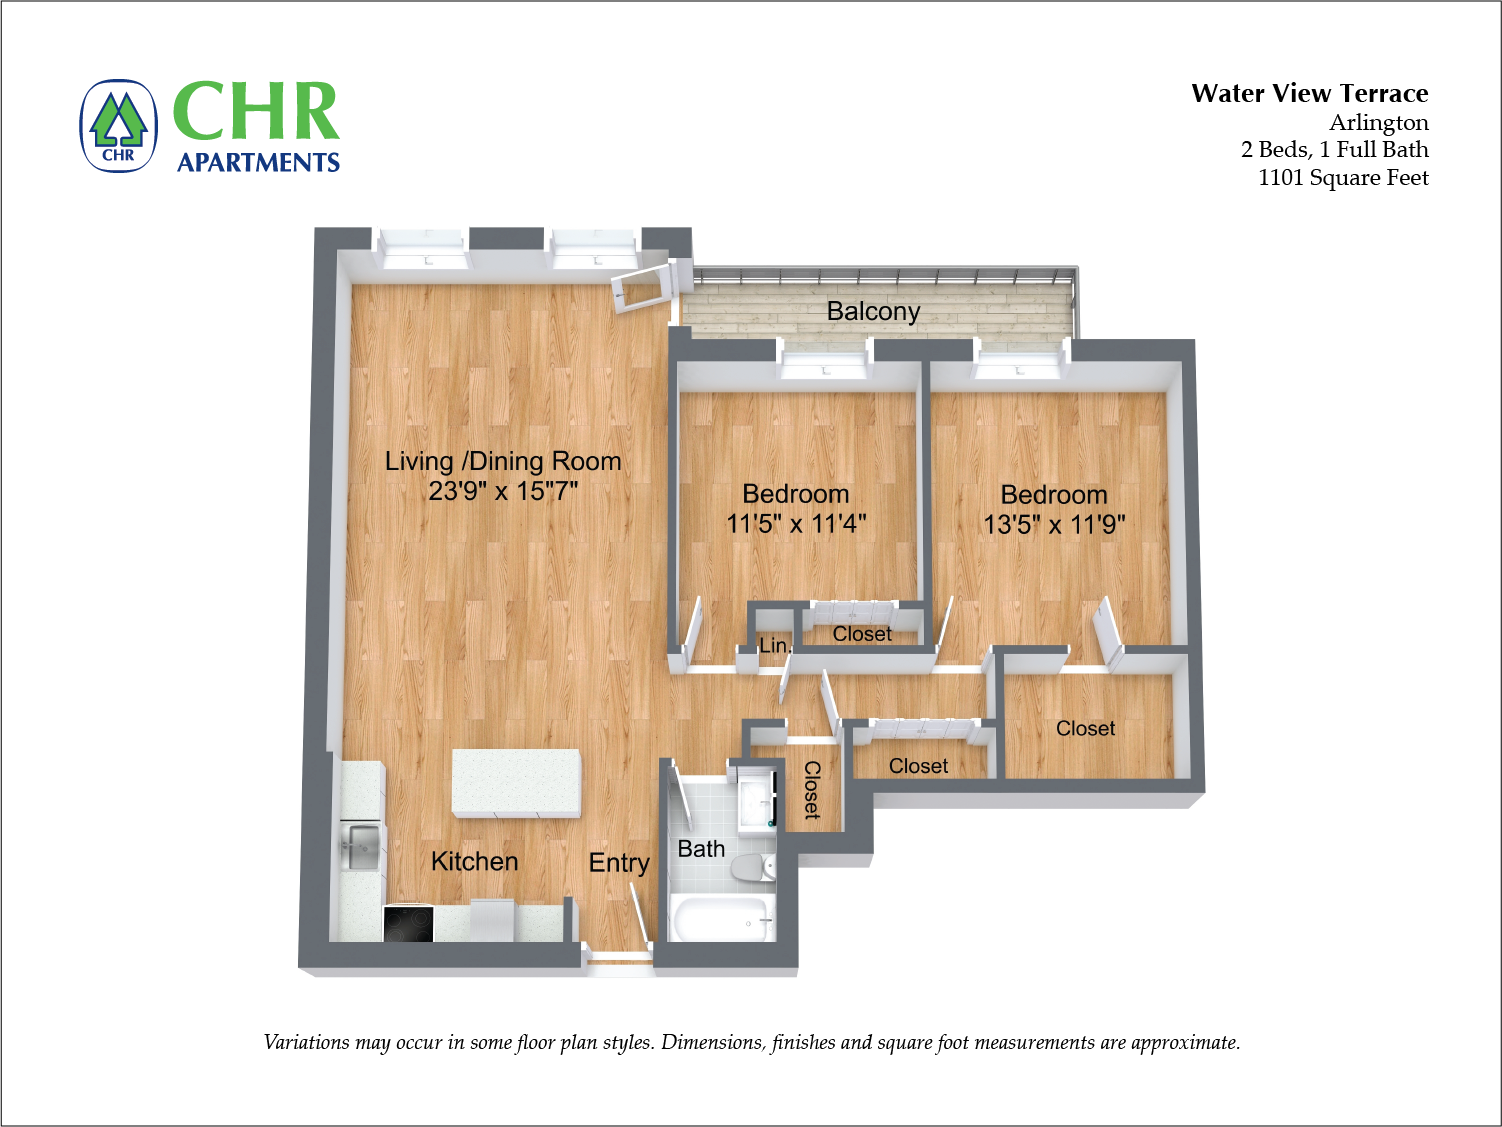 Click to view 2 Bed/1 Bath with Balcony and A/C floor plan gallery